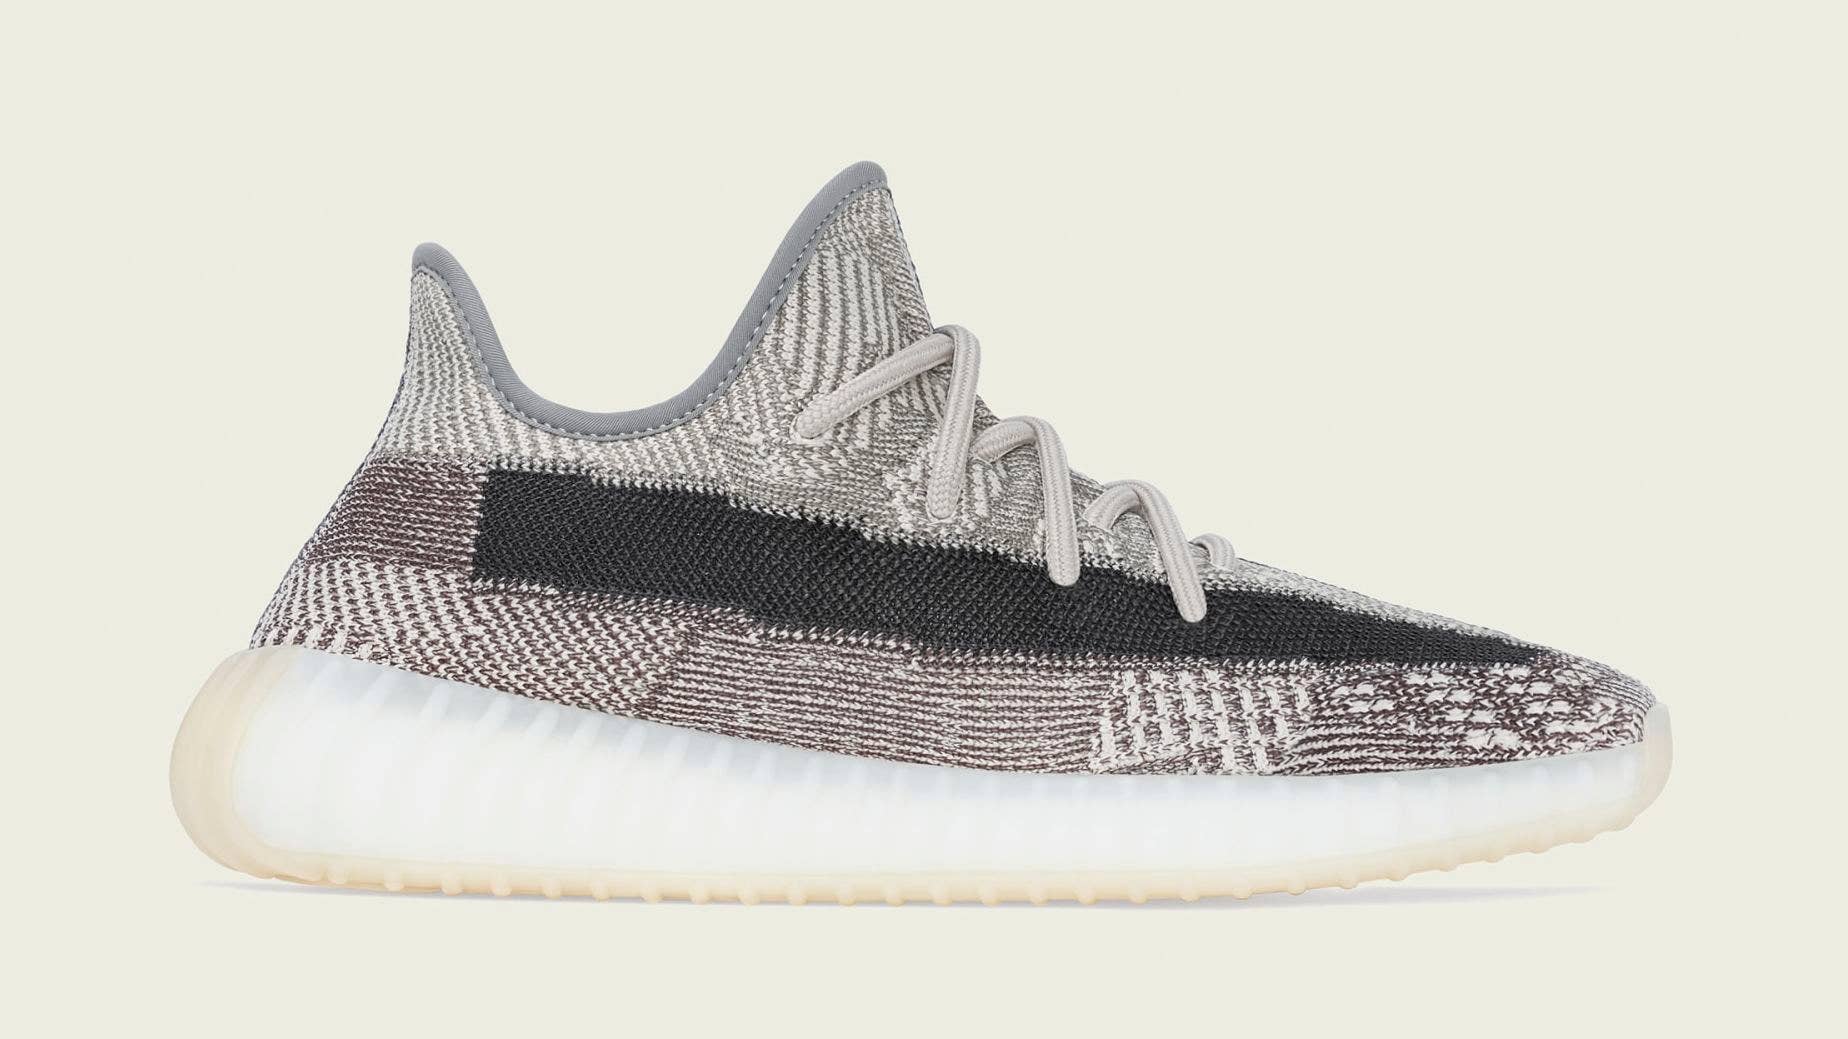 Adidas Yeezy Boost 350 V2 'Zyon' FZ1267 Lateral